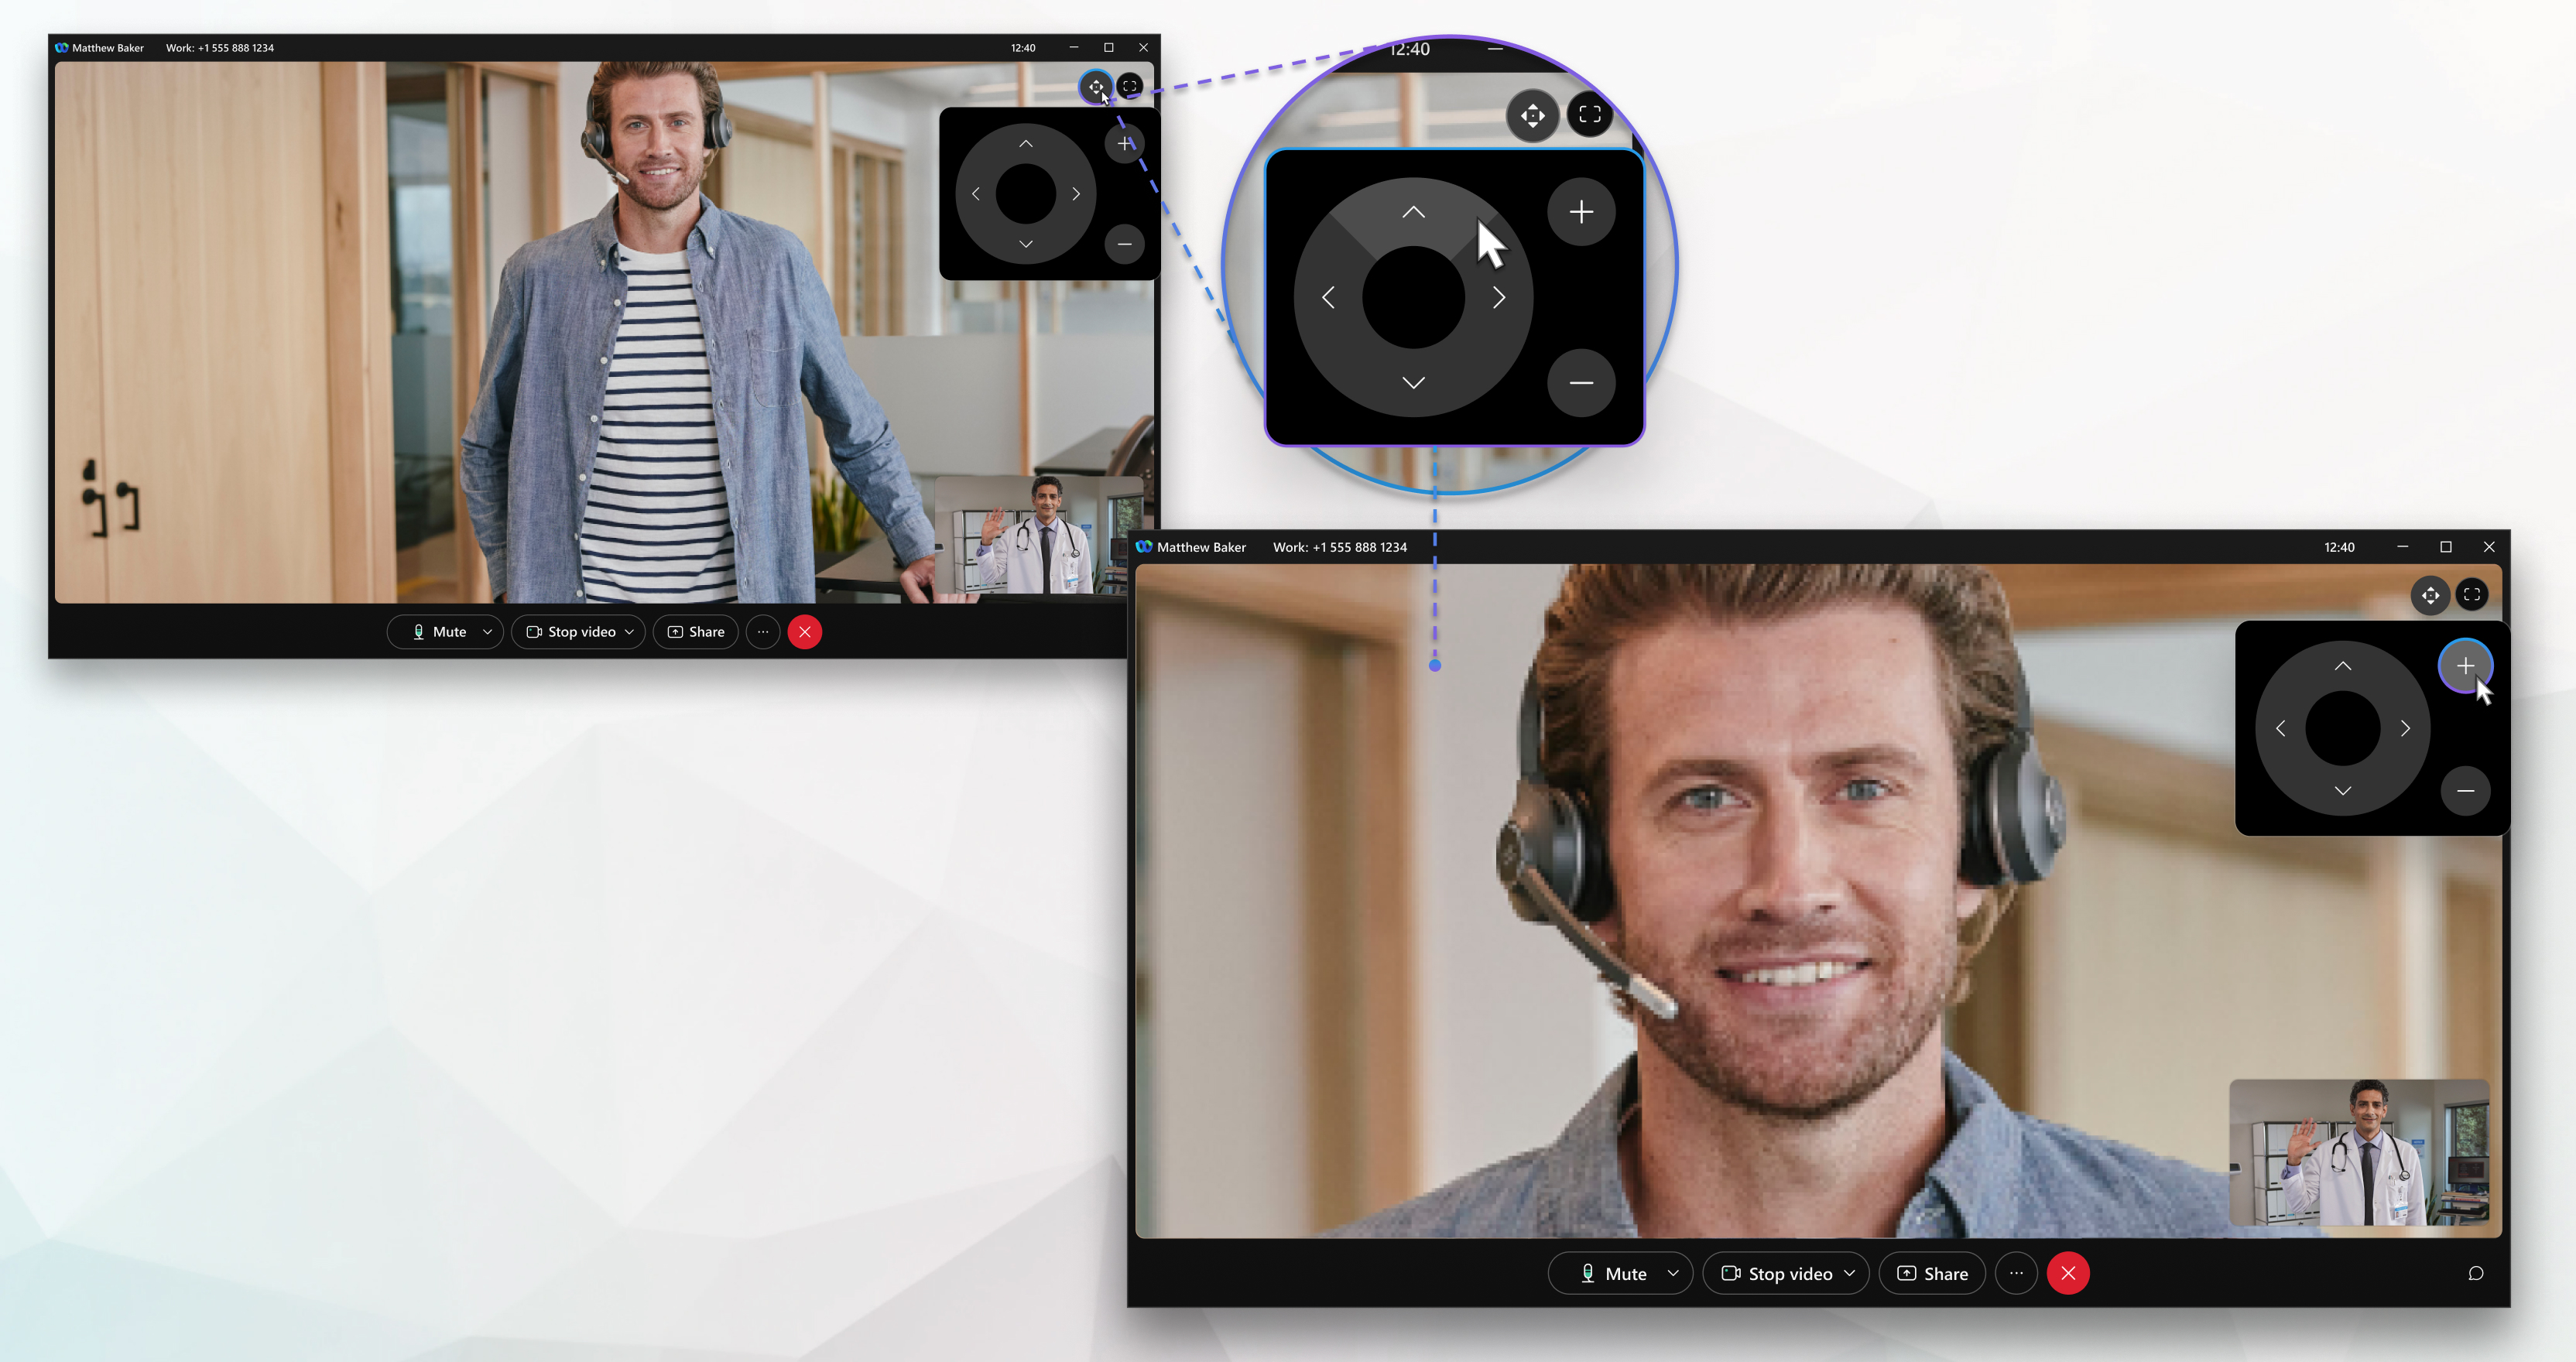 Webex App  Control someone's camera during a video call